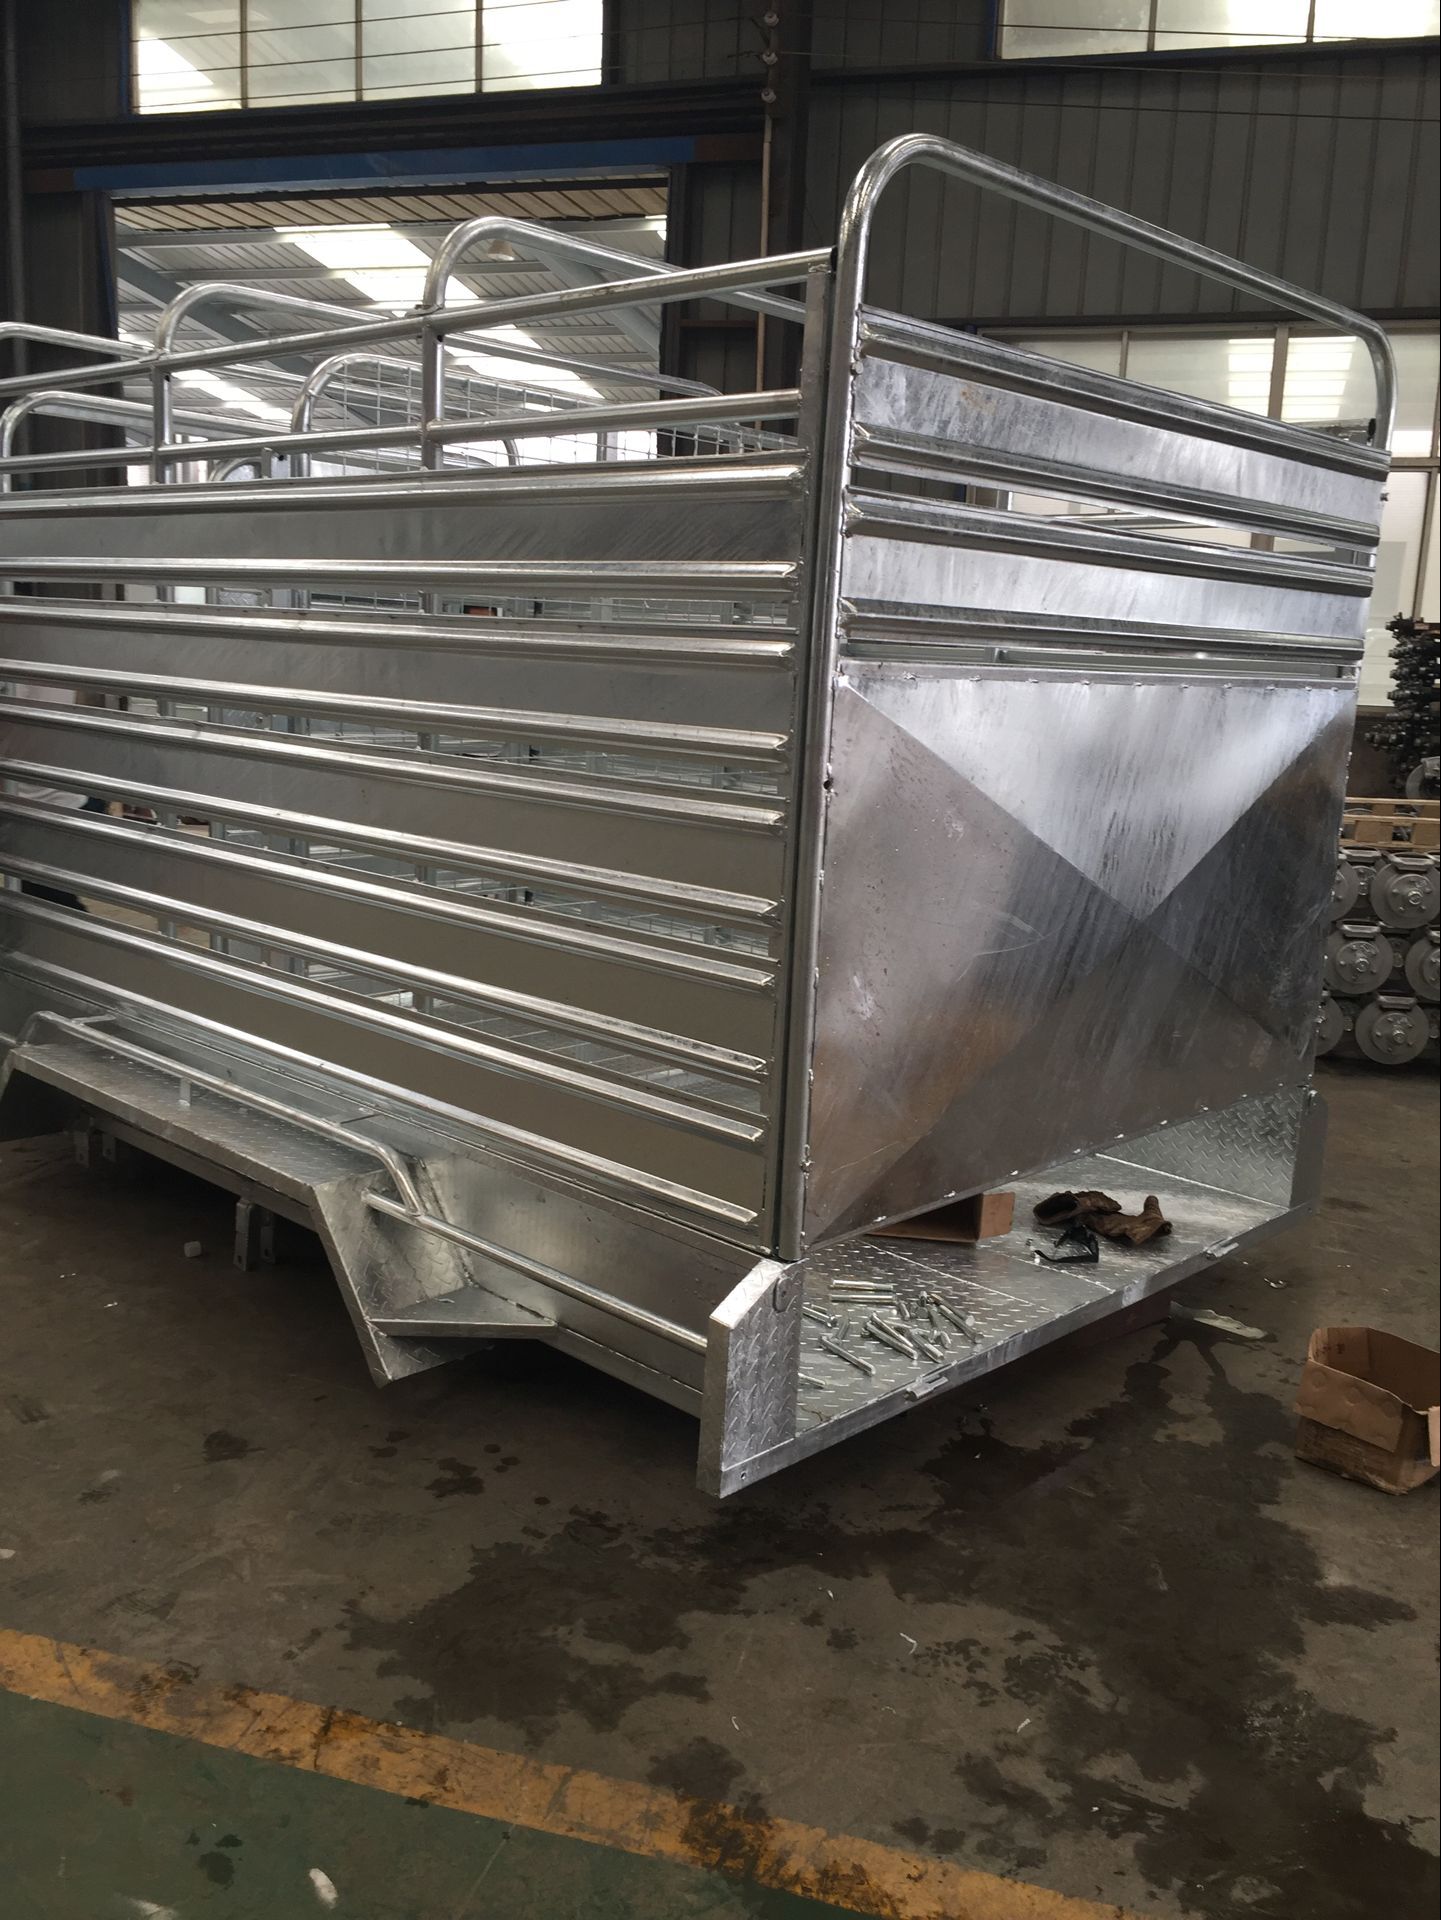  animal delivery trailers for tractor